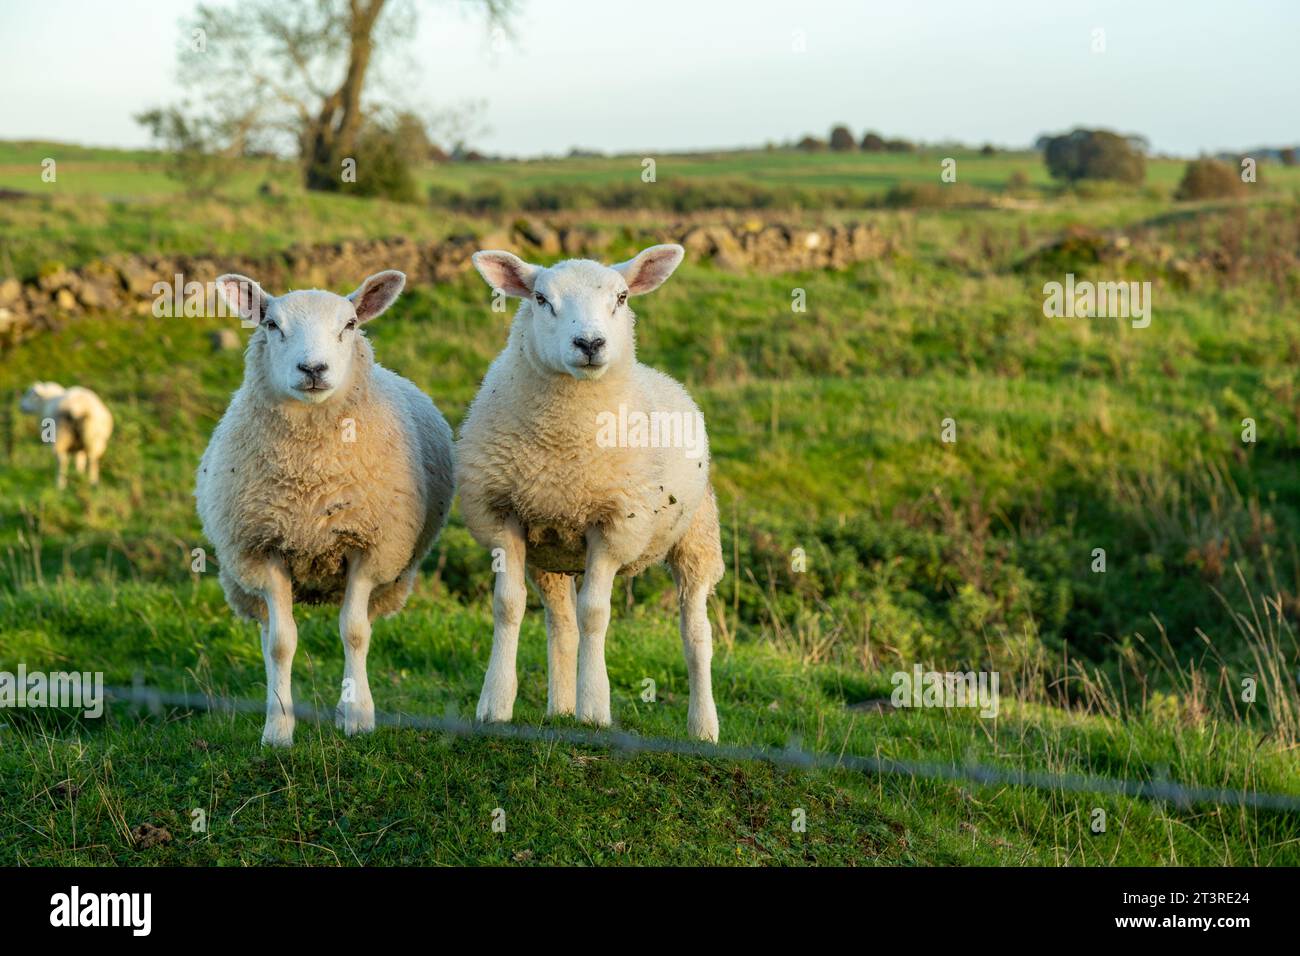 Two sheep standing side by side looking to camera Stock Photo